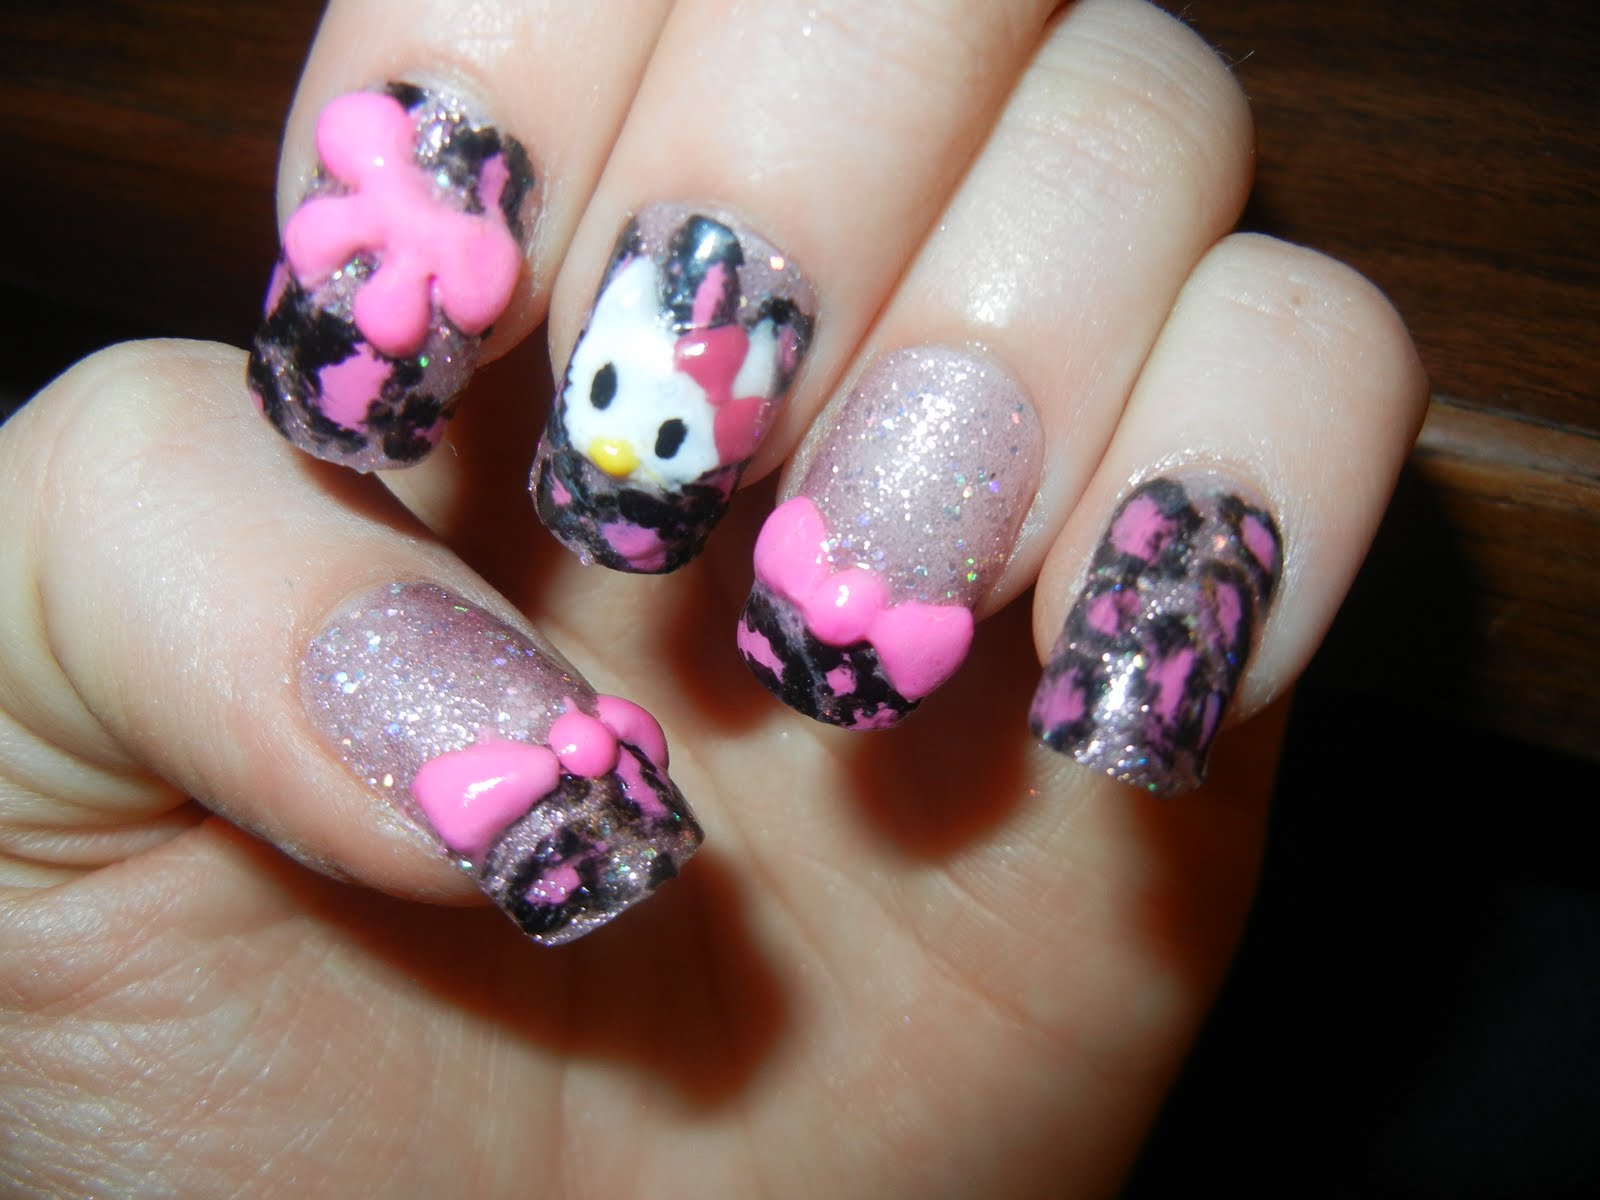 Nails By Leah: New Hello Kitty Nails! 3D bows and hello kitty face 